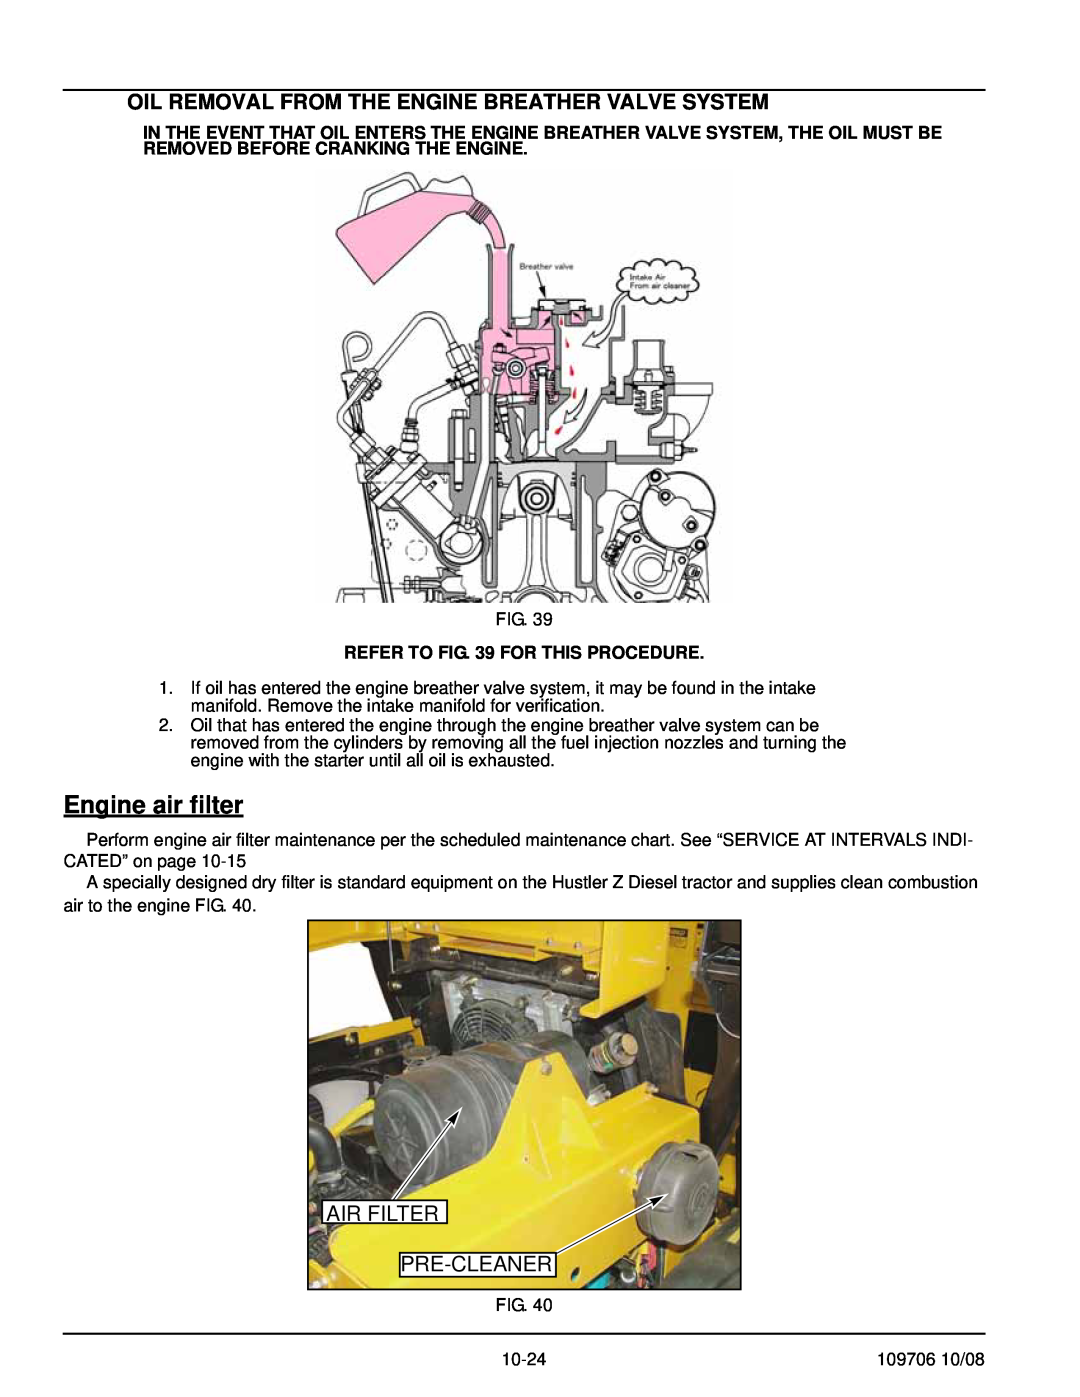 Hustler Turf Diesel Z manual Engine air filter, Oil Removal From The Engine Breather Valve System, Air Filter, Pre-Cleaner 